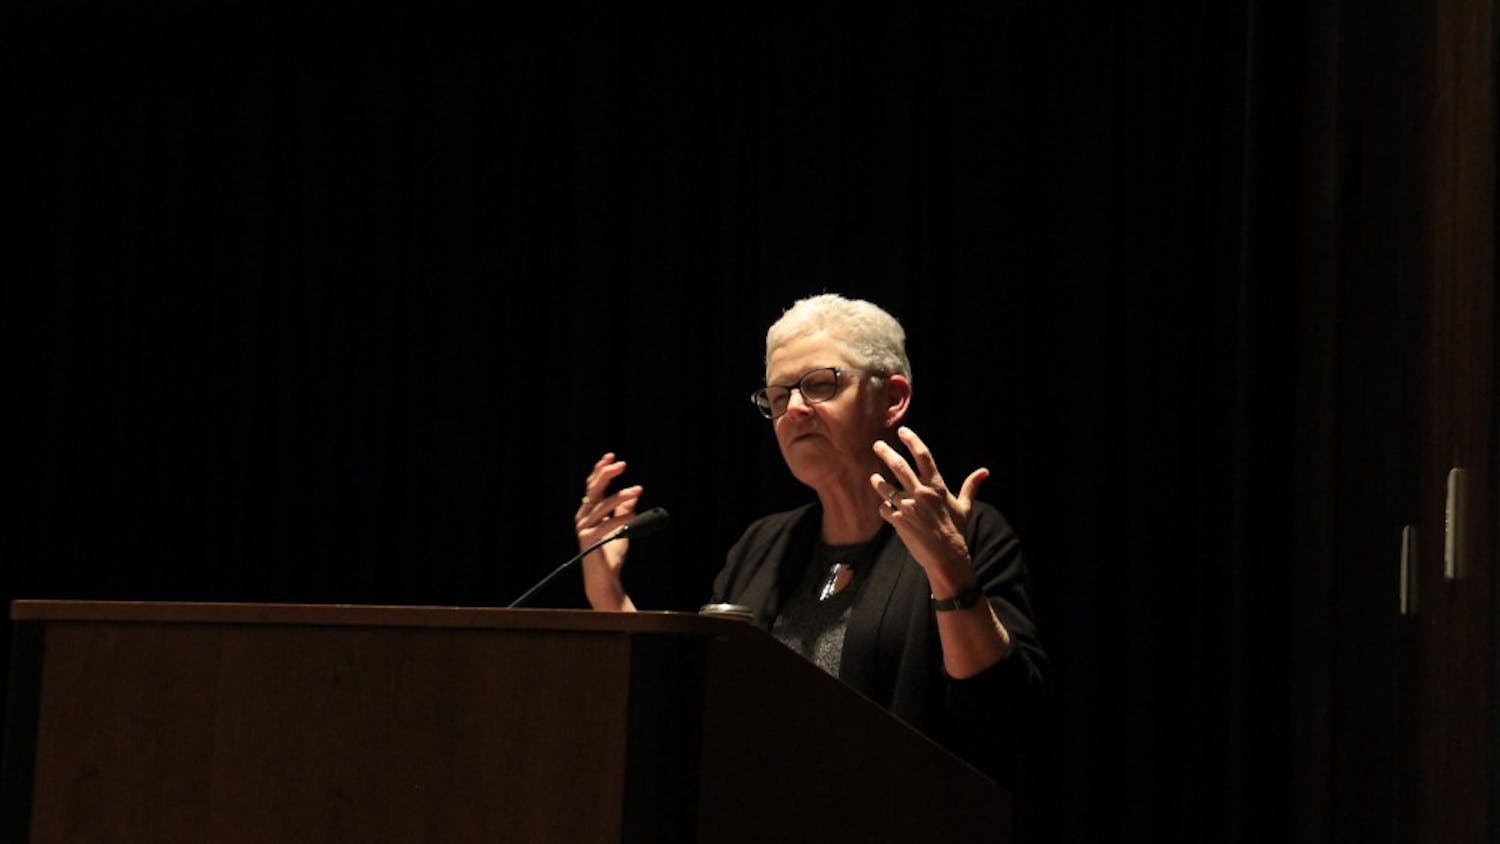 Gina McCarthy, former administrator for the Environmental Protection Agency, speaks at 5 p.m. Jan. 16 in the Whittenberger Auditorium in the Indiana Memorial Union.